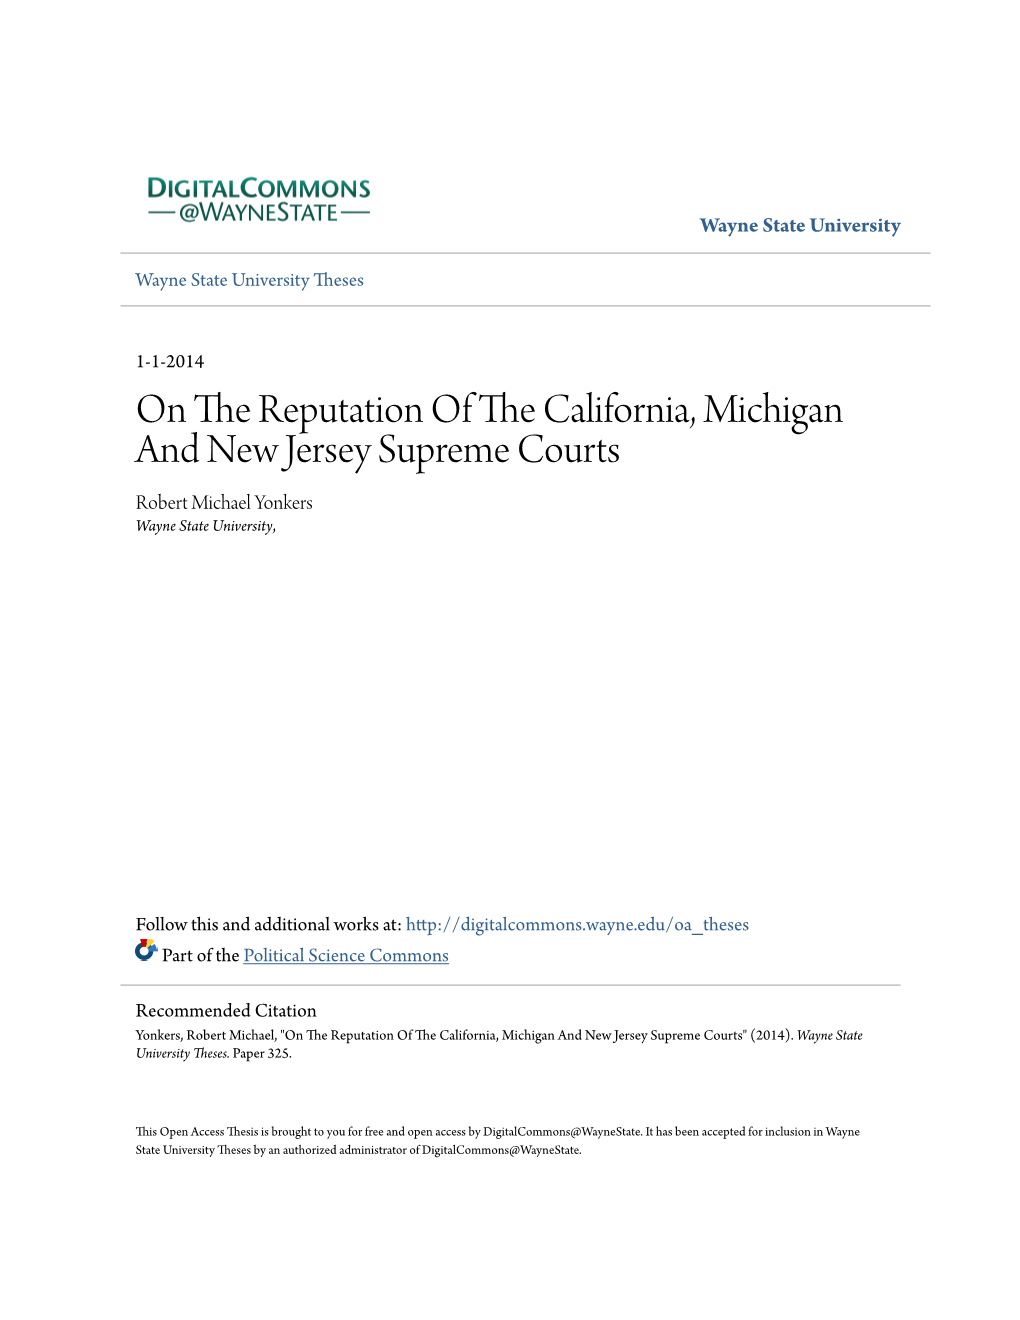 On the Reputation of the California, Michigan and New Jersey Supreme Courts